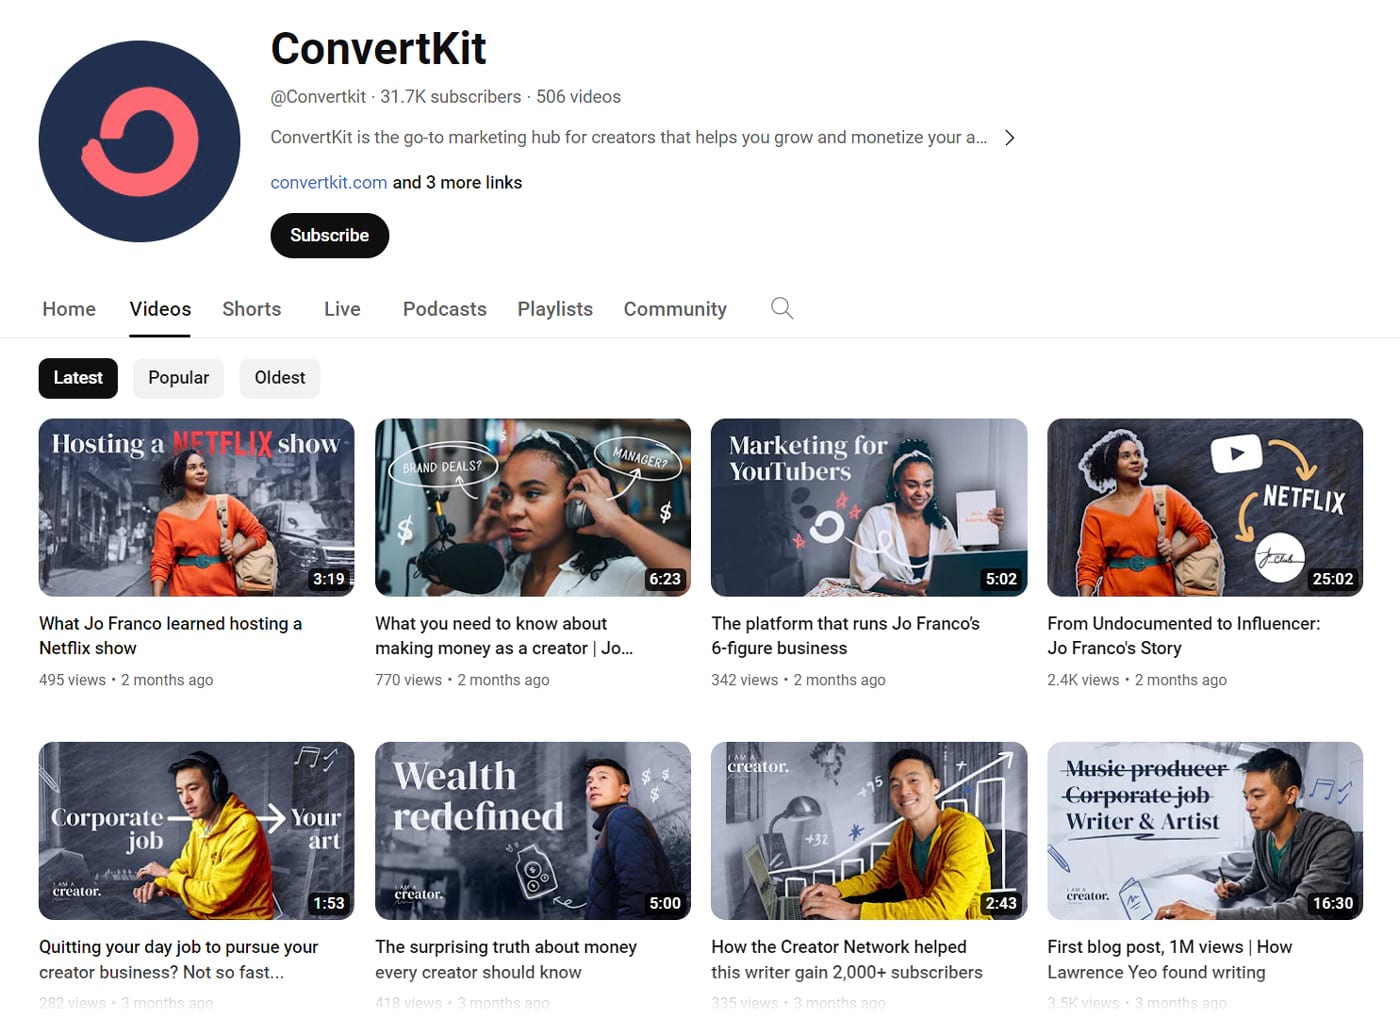 ConvertKit's YouTube channel